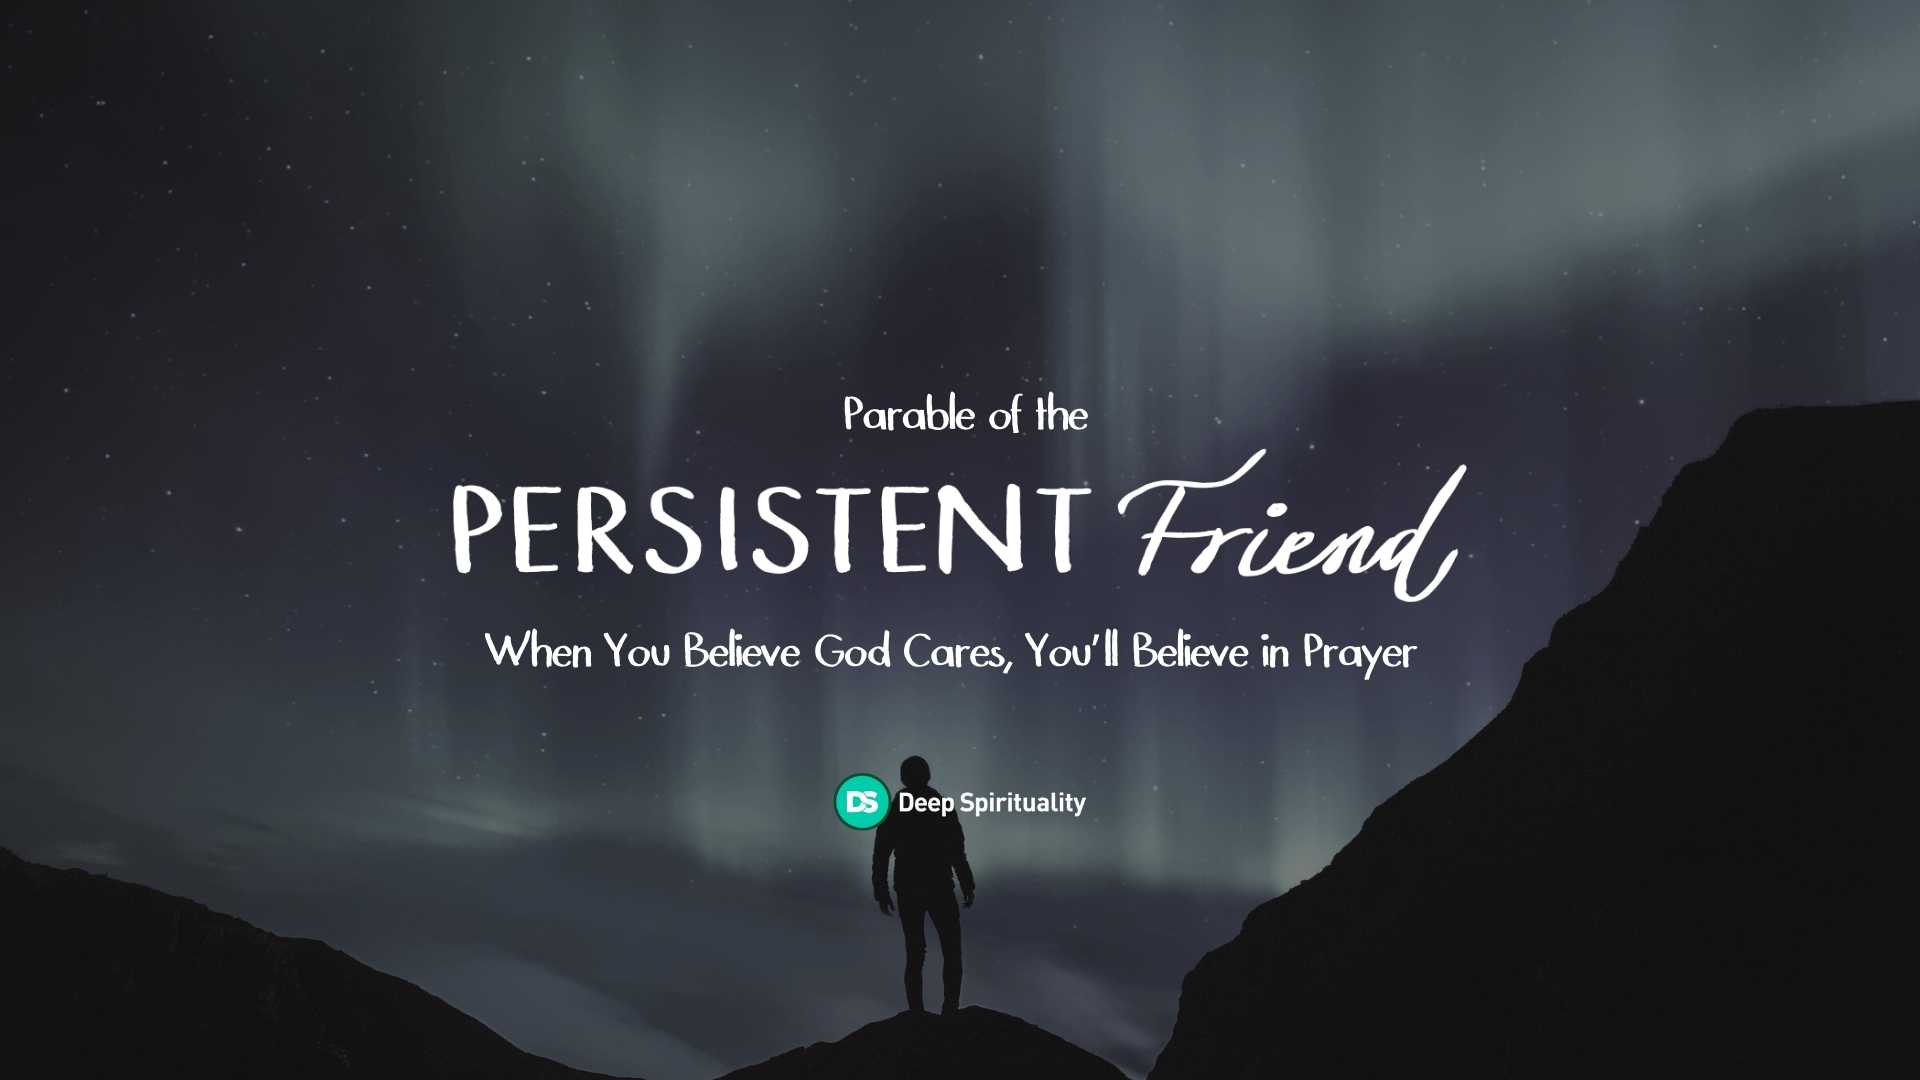 You Can Count On Me: What We Should Learn from the Parable of the Persistent Friend 17